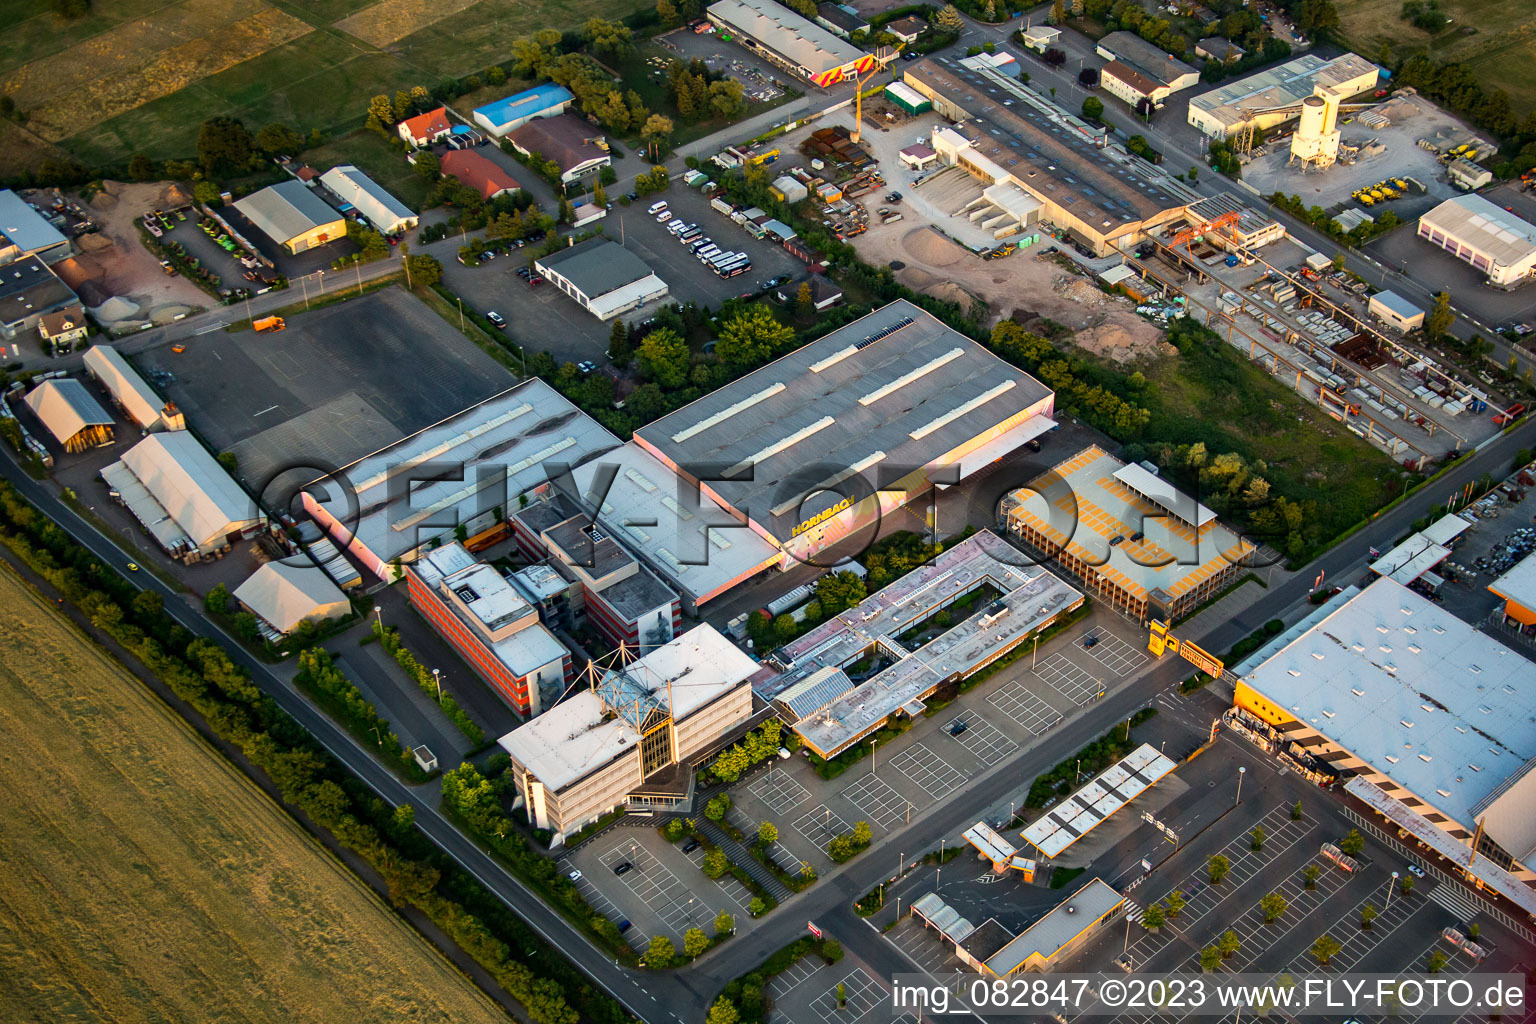 Aerial photograpy of Hornbach hardware store headquarters in Bornheim in the state Rhineland-Palatinate, Germany